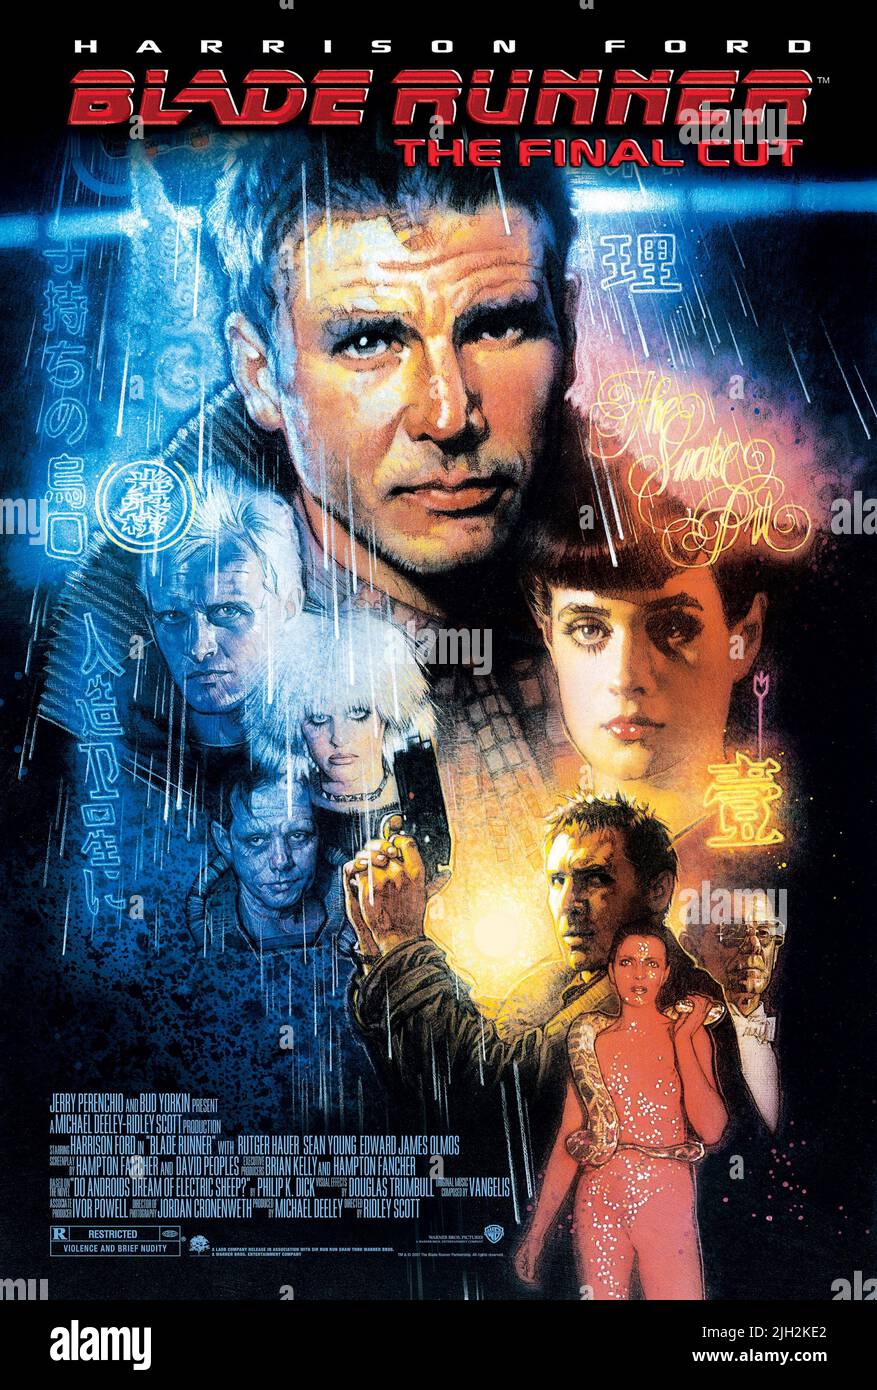 HAUER,SANDERSON,HANNAH,FORD,YOUNG,CASSIDY,POSTER, BLADE RUNNER, 1982 Stock Photo